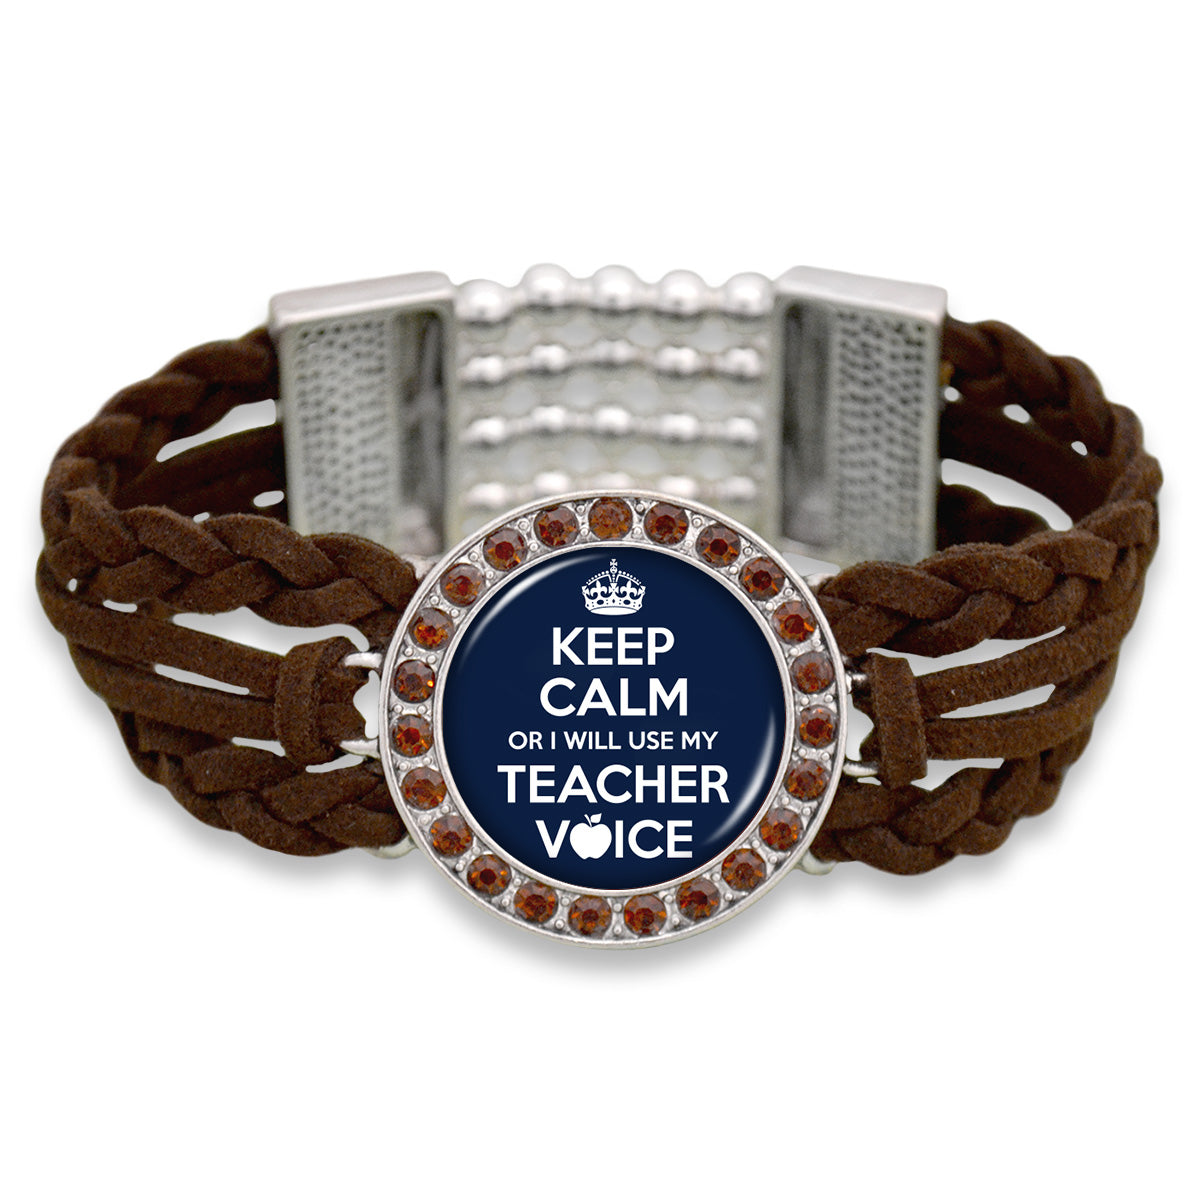 "Keep Calm Or I Will Use My Teacher Voice" Outdoors Suede Stretch Bracelet